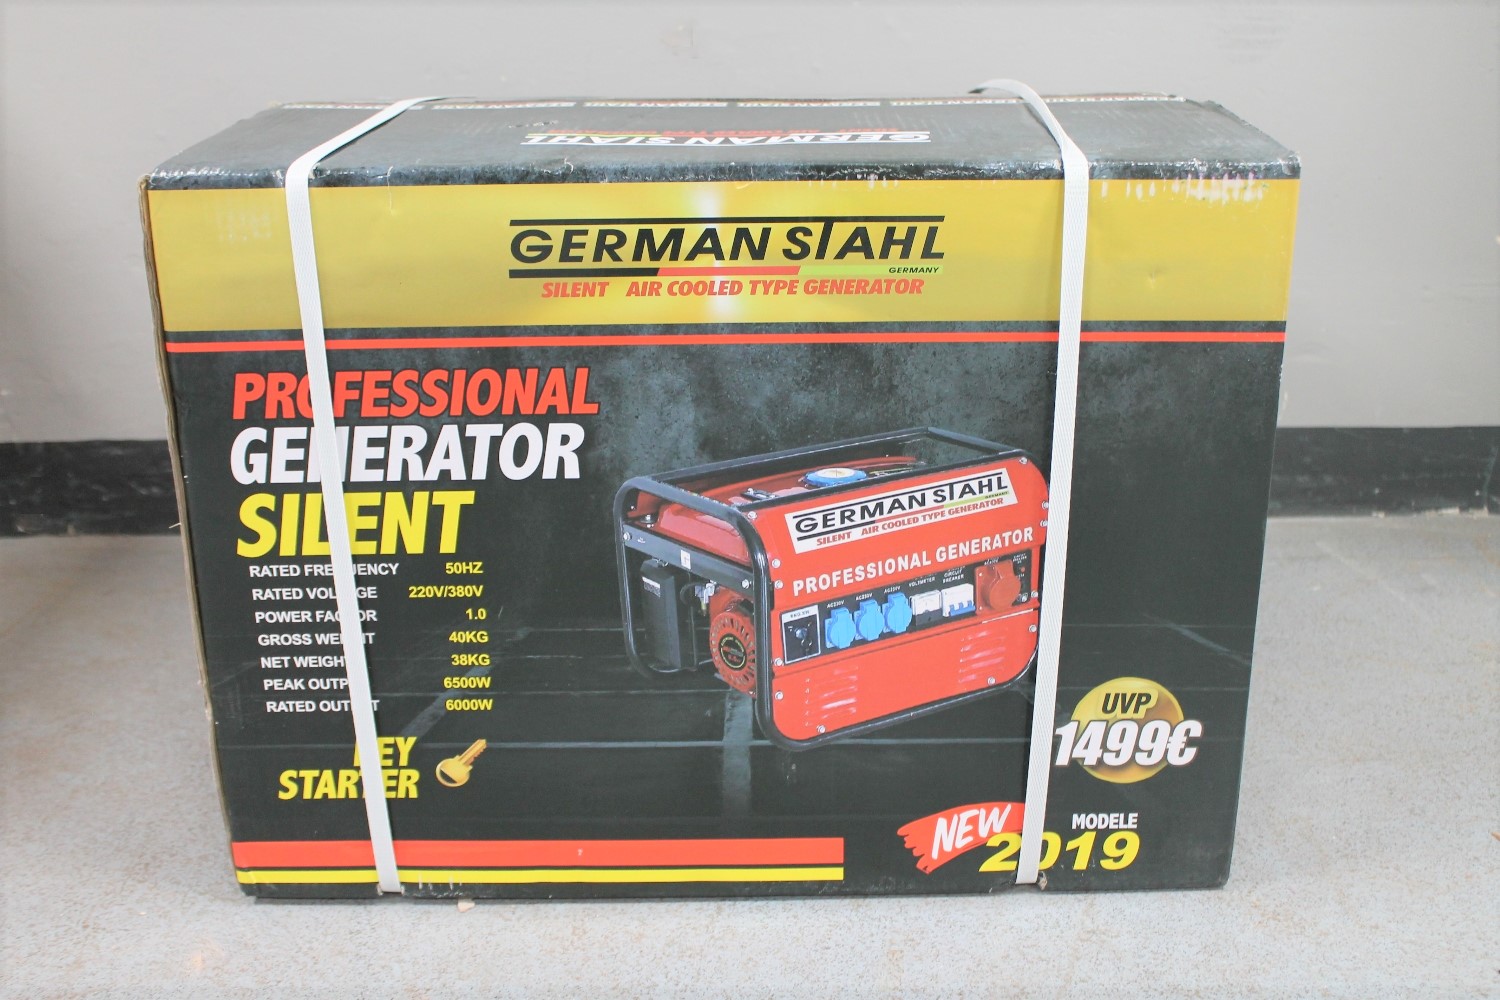 A boxed German Stahl 220V professional silent generator